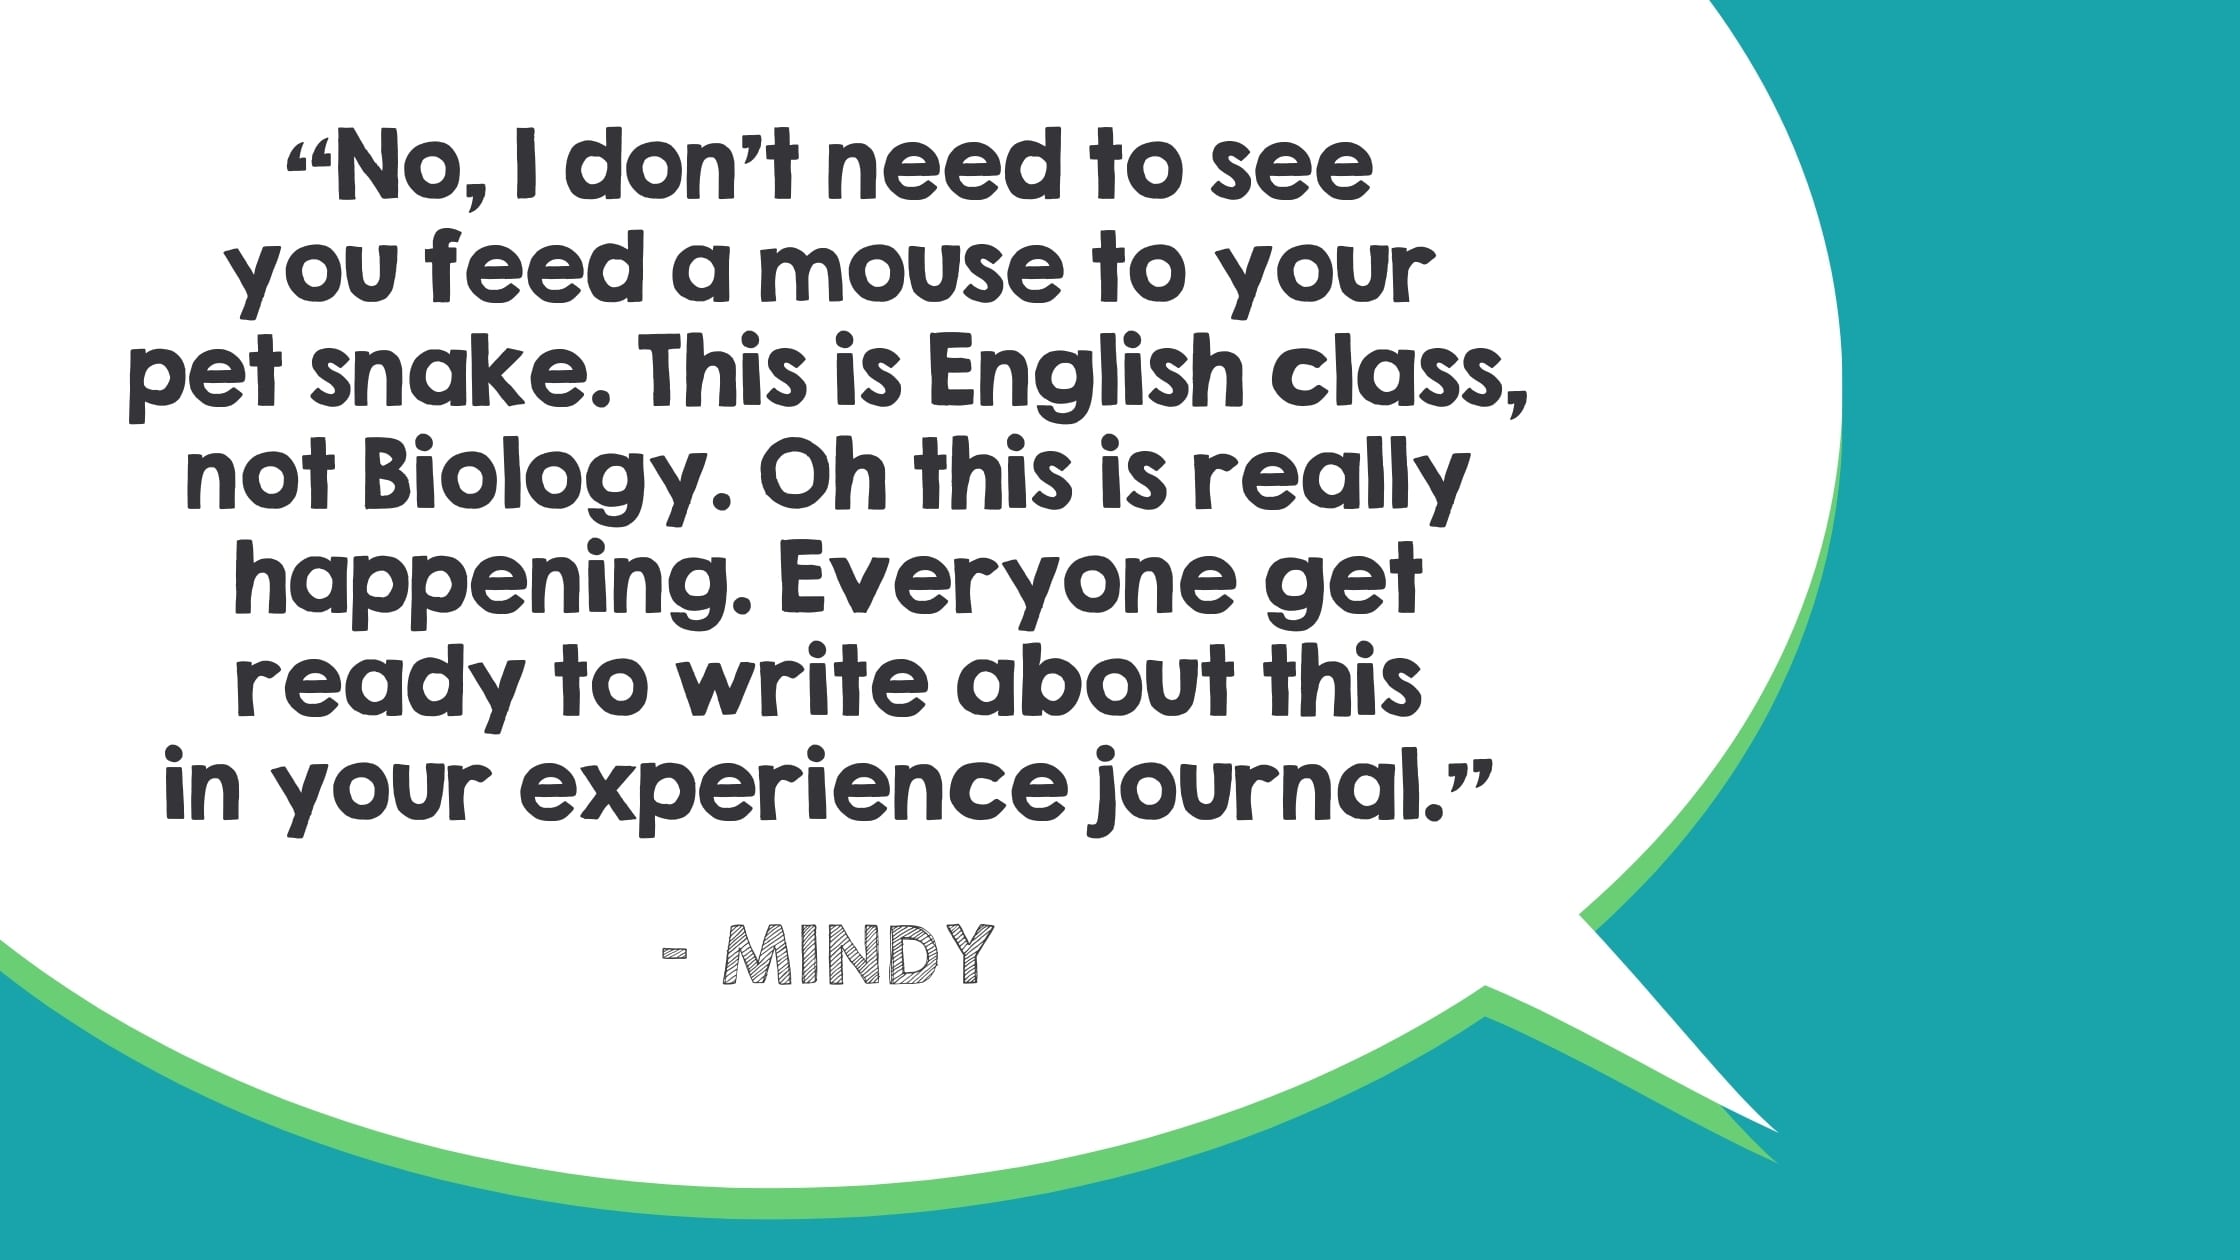 No, I don’t need to see you feed a mouse to your pet snake. This is English class, not Biology. Oh this is really happening. Everyone get ready to write about this in your experience journal.—Mindy